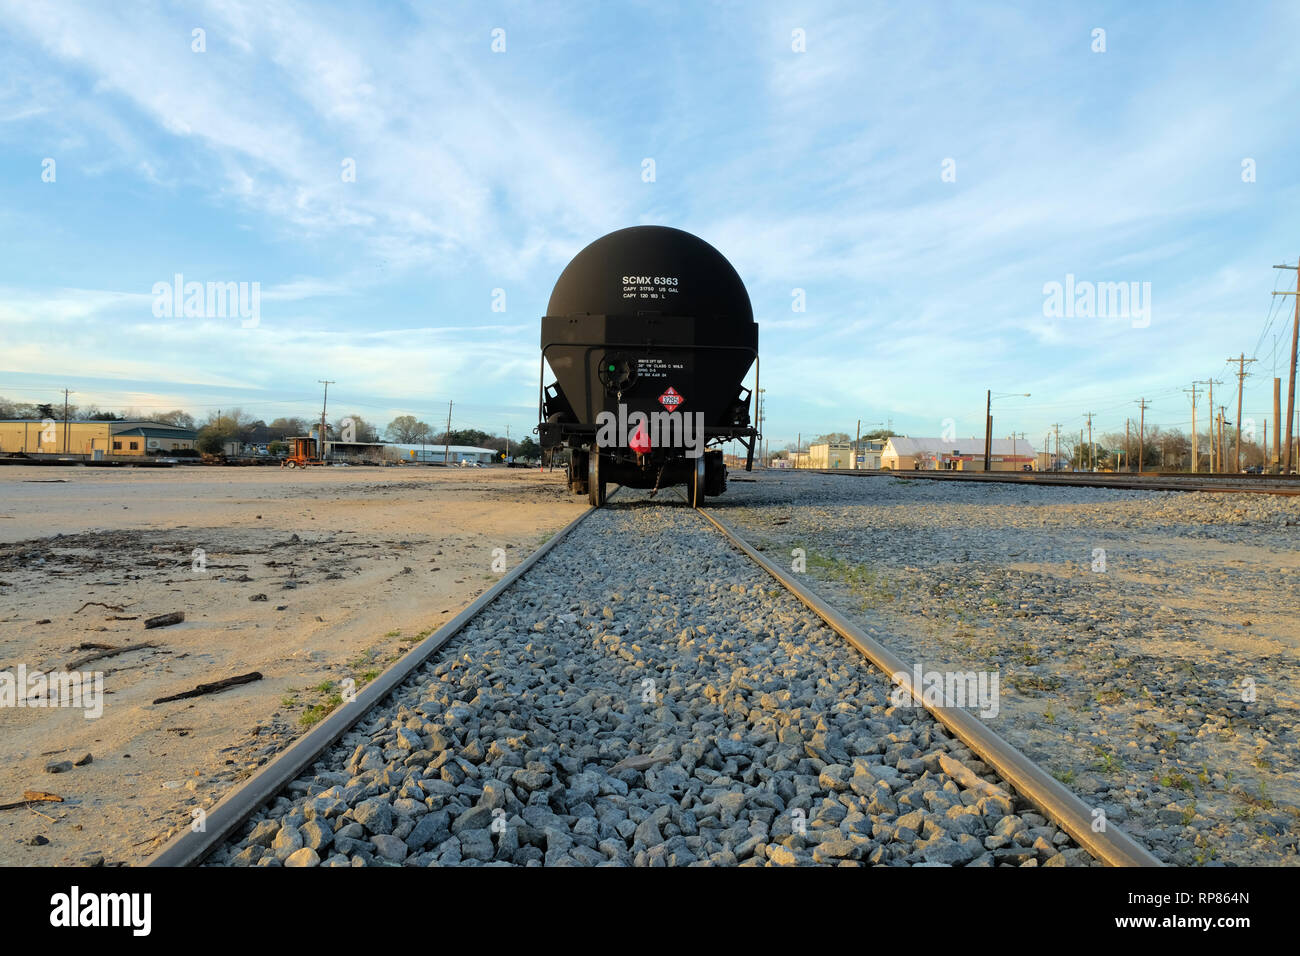 Train tanker for transporting Class 3 flammable liquids by rail; railway transportation for chemicals; Bryan, Texas, USA. Stock Photo